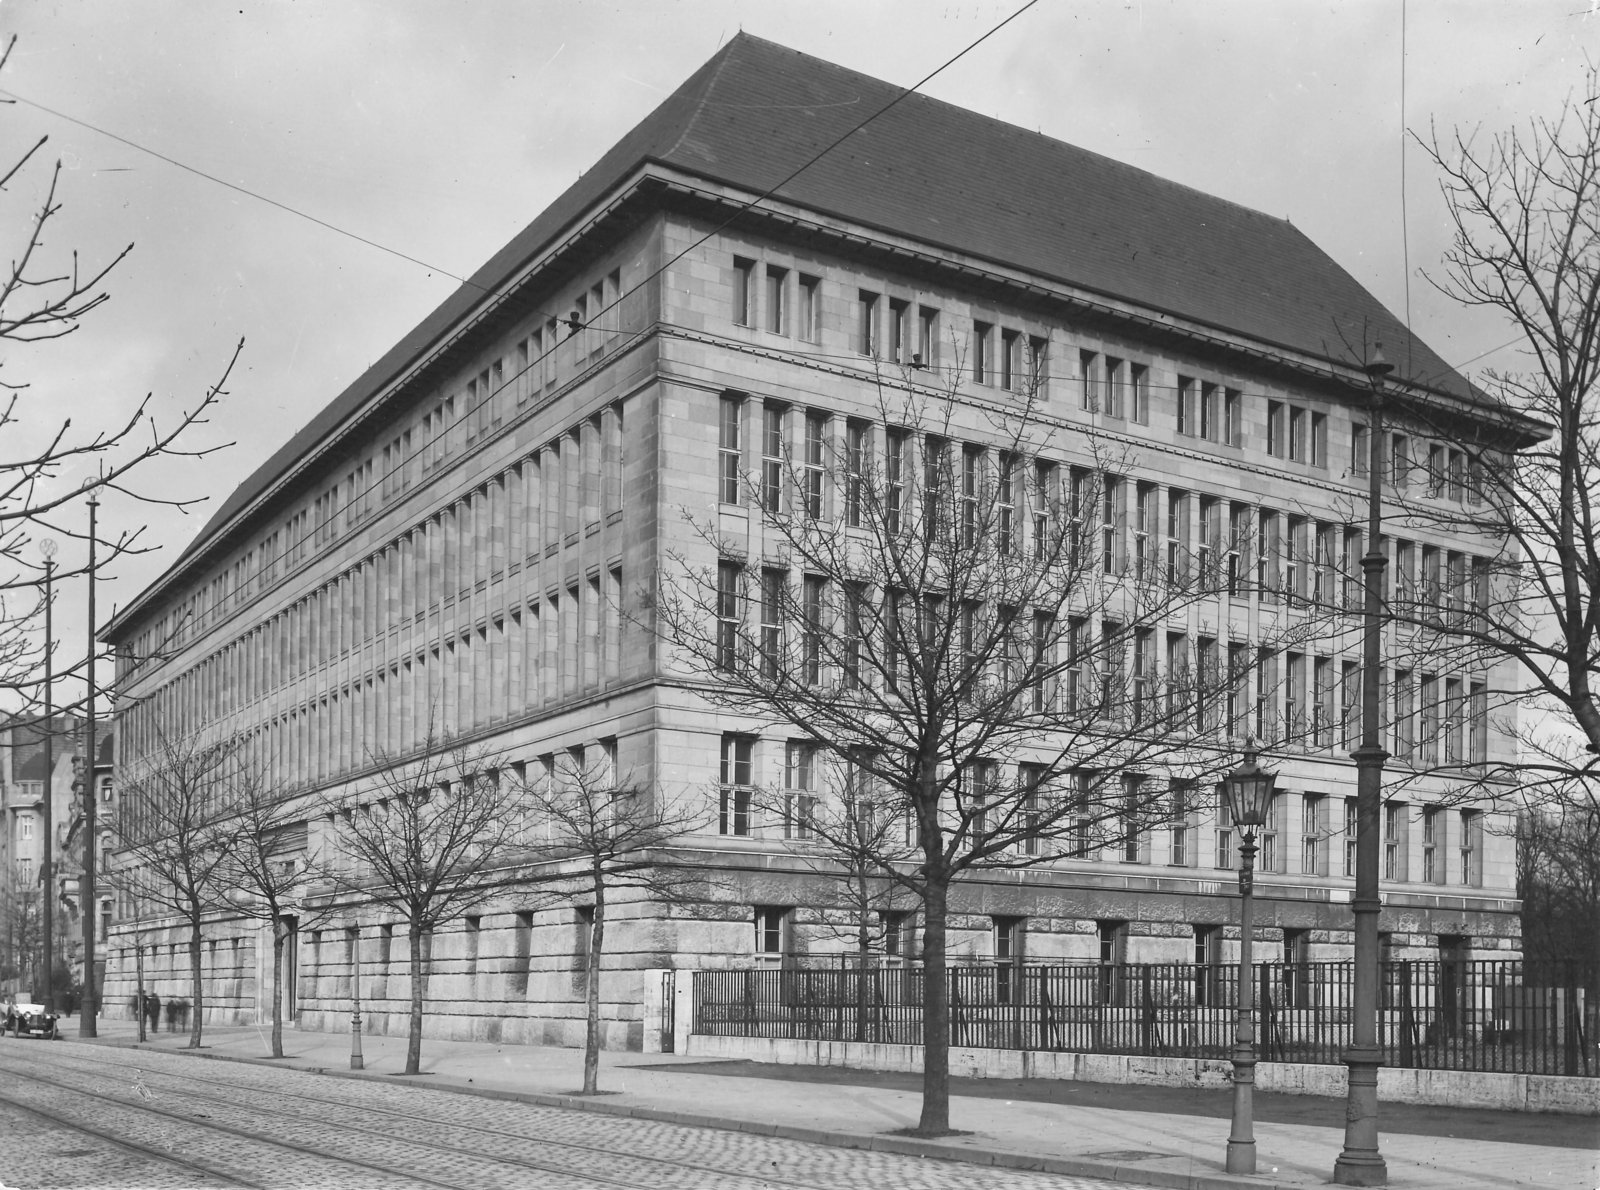 The Behrens building 1912